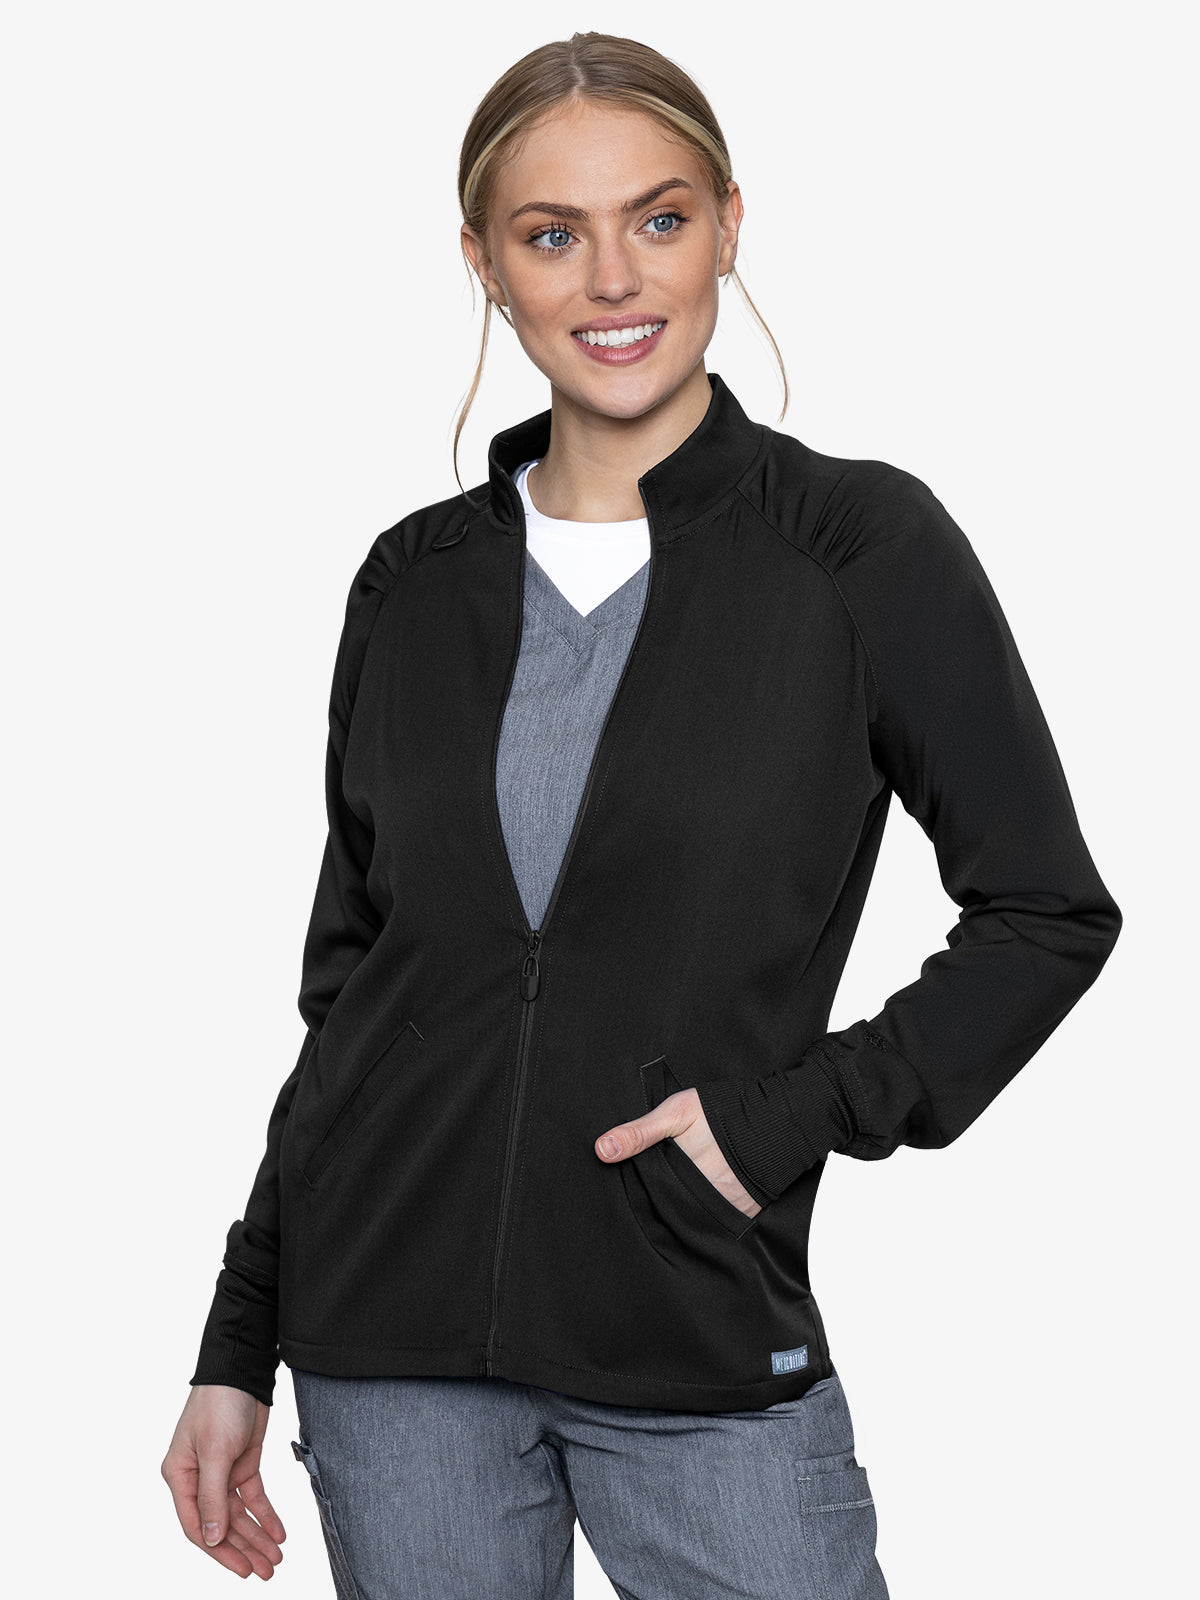 Zip Front Warm-up Jacket-2391A - Jackets - Products